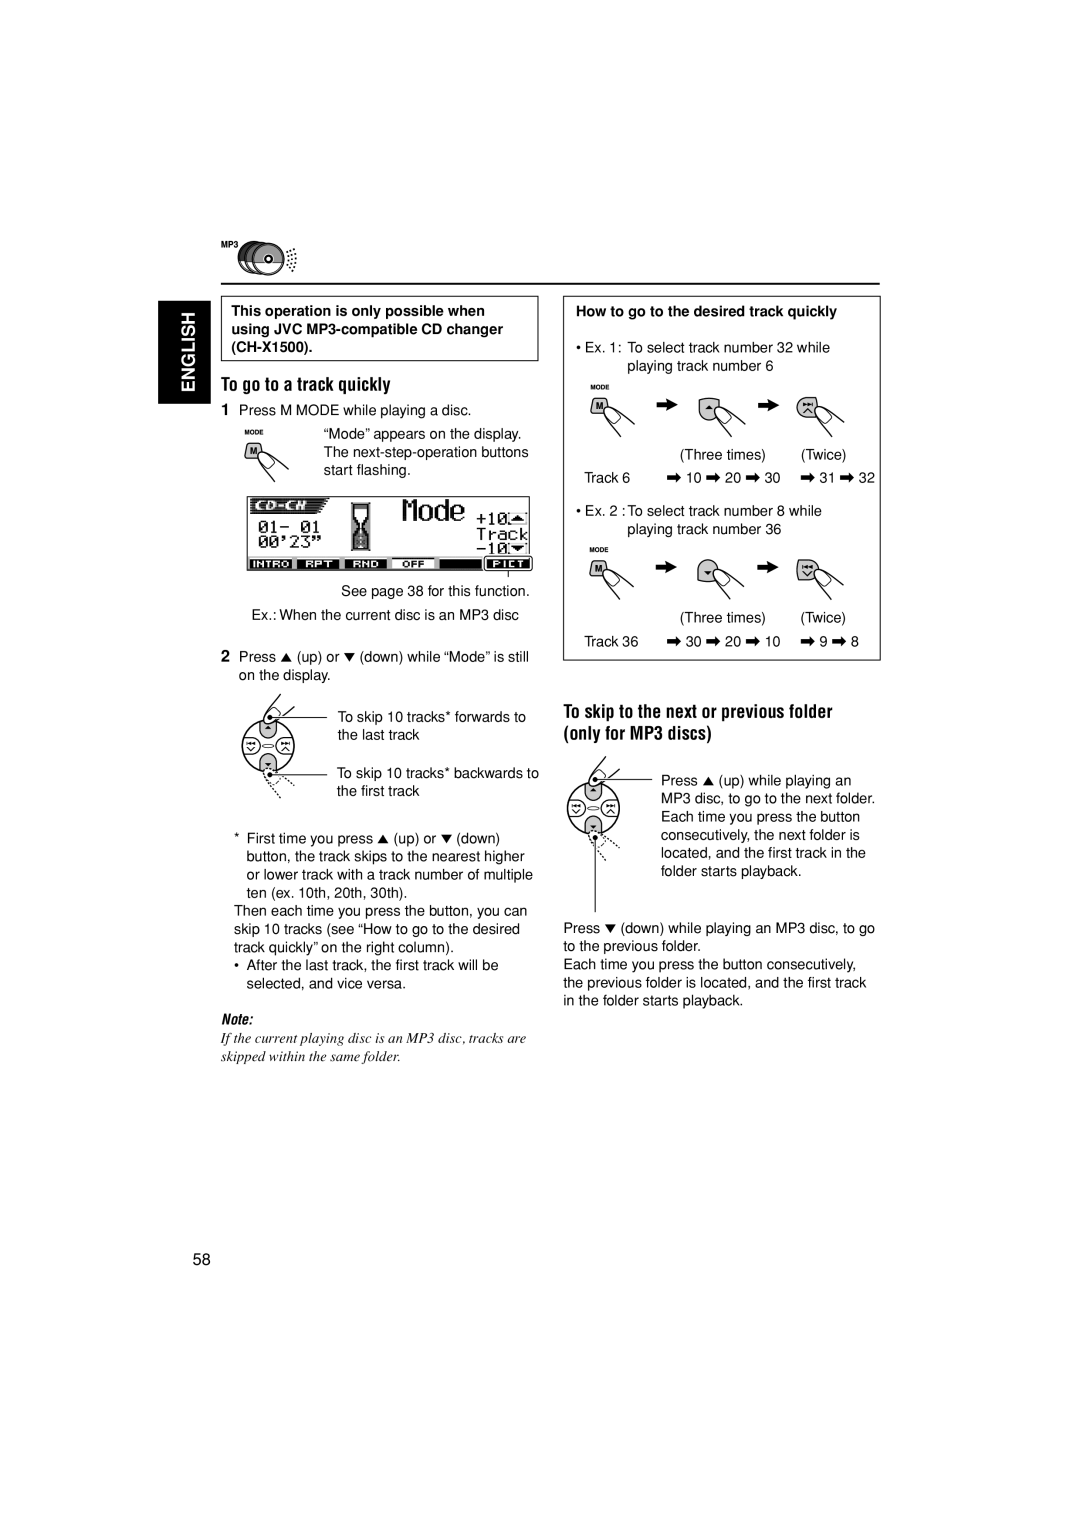 JVC KD-LH401 service manual To skip to the next or previous folder only for MP3 discs, English, To go to a track quickly 